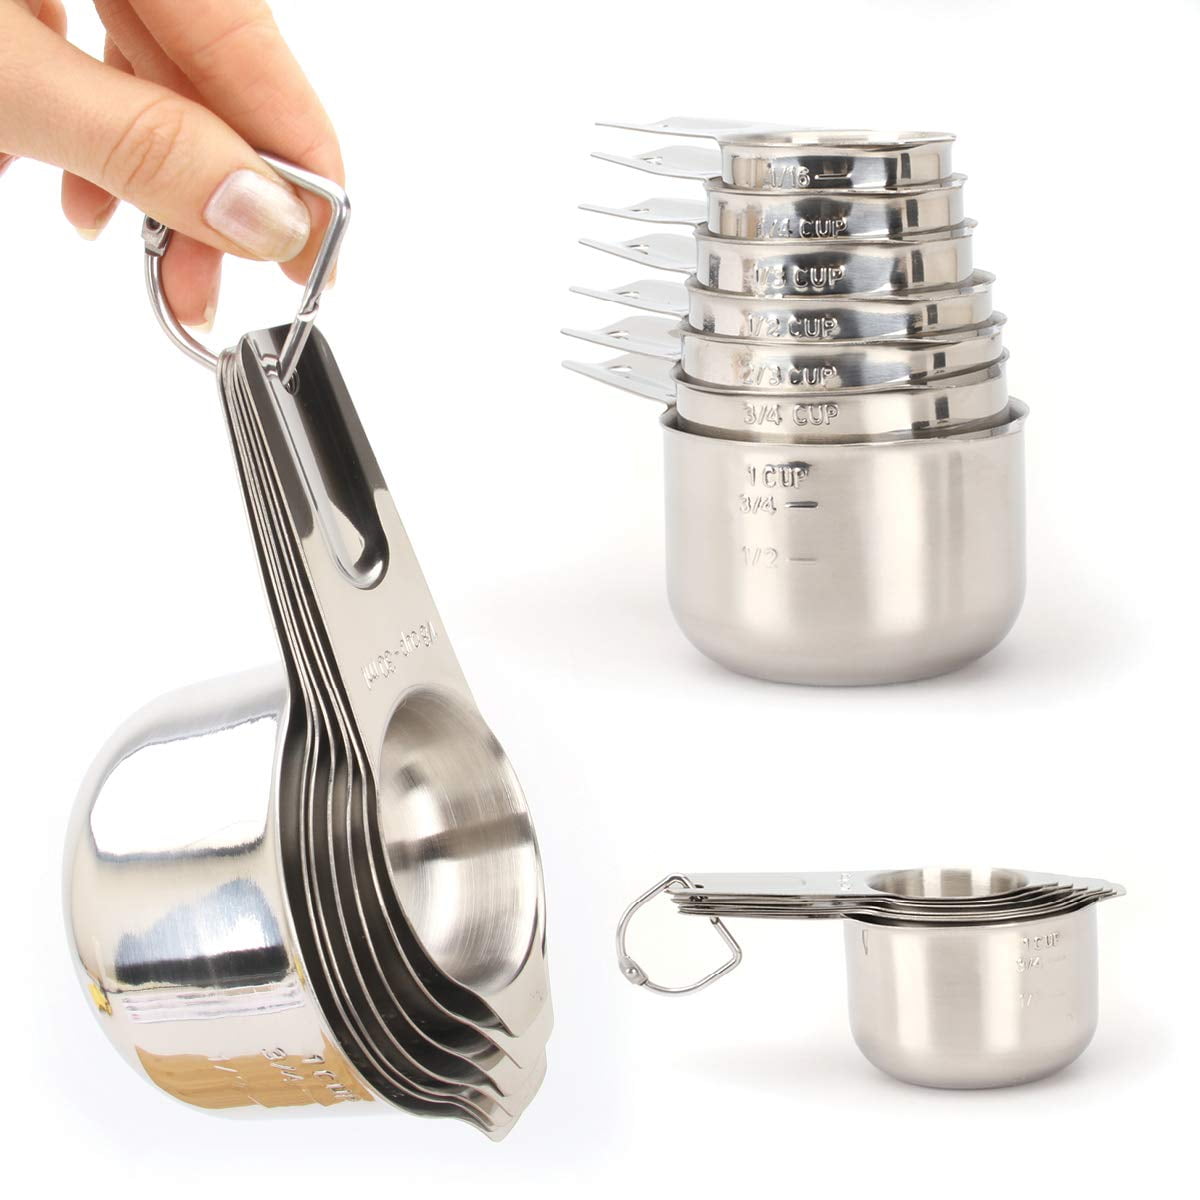 Stainless Steel Measuring Cups Set of 7 Heavy Duty Stackable Metal Mea —  CHIMIYA